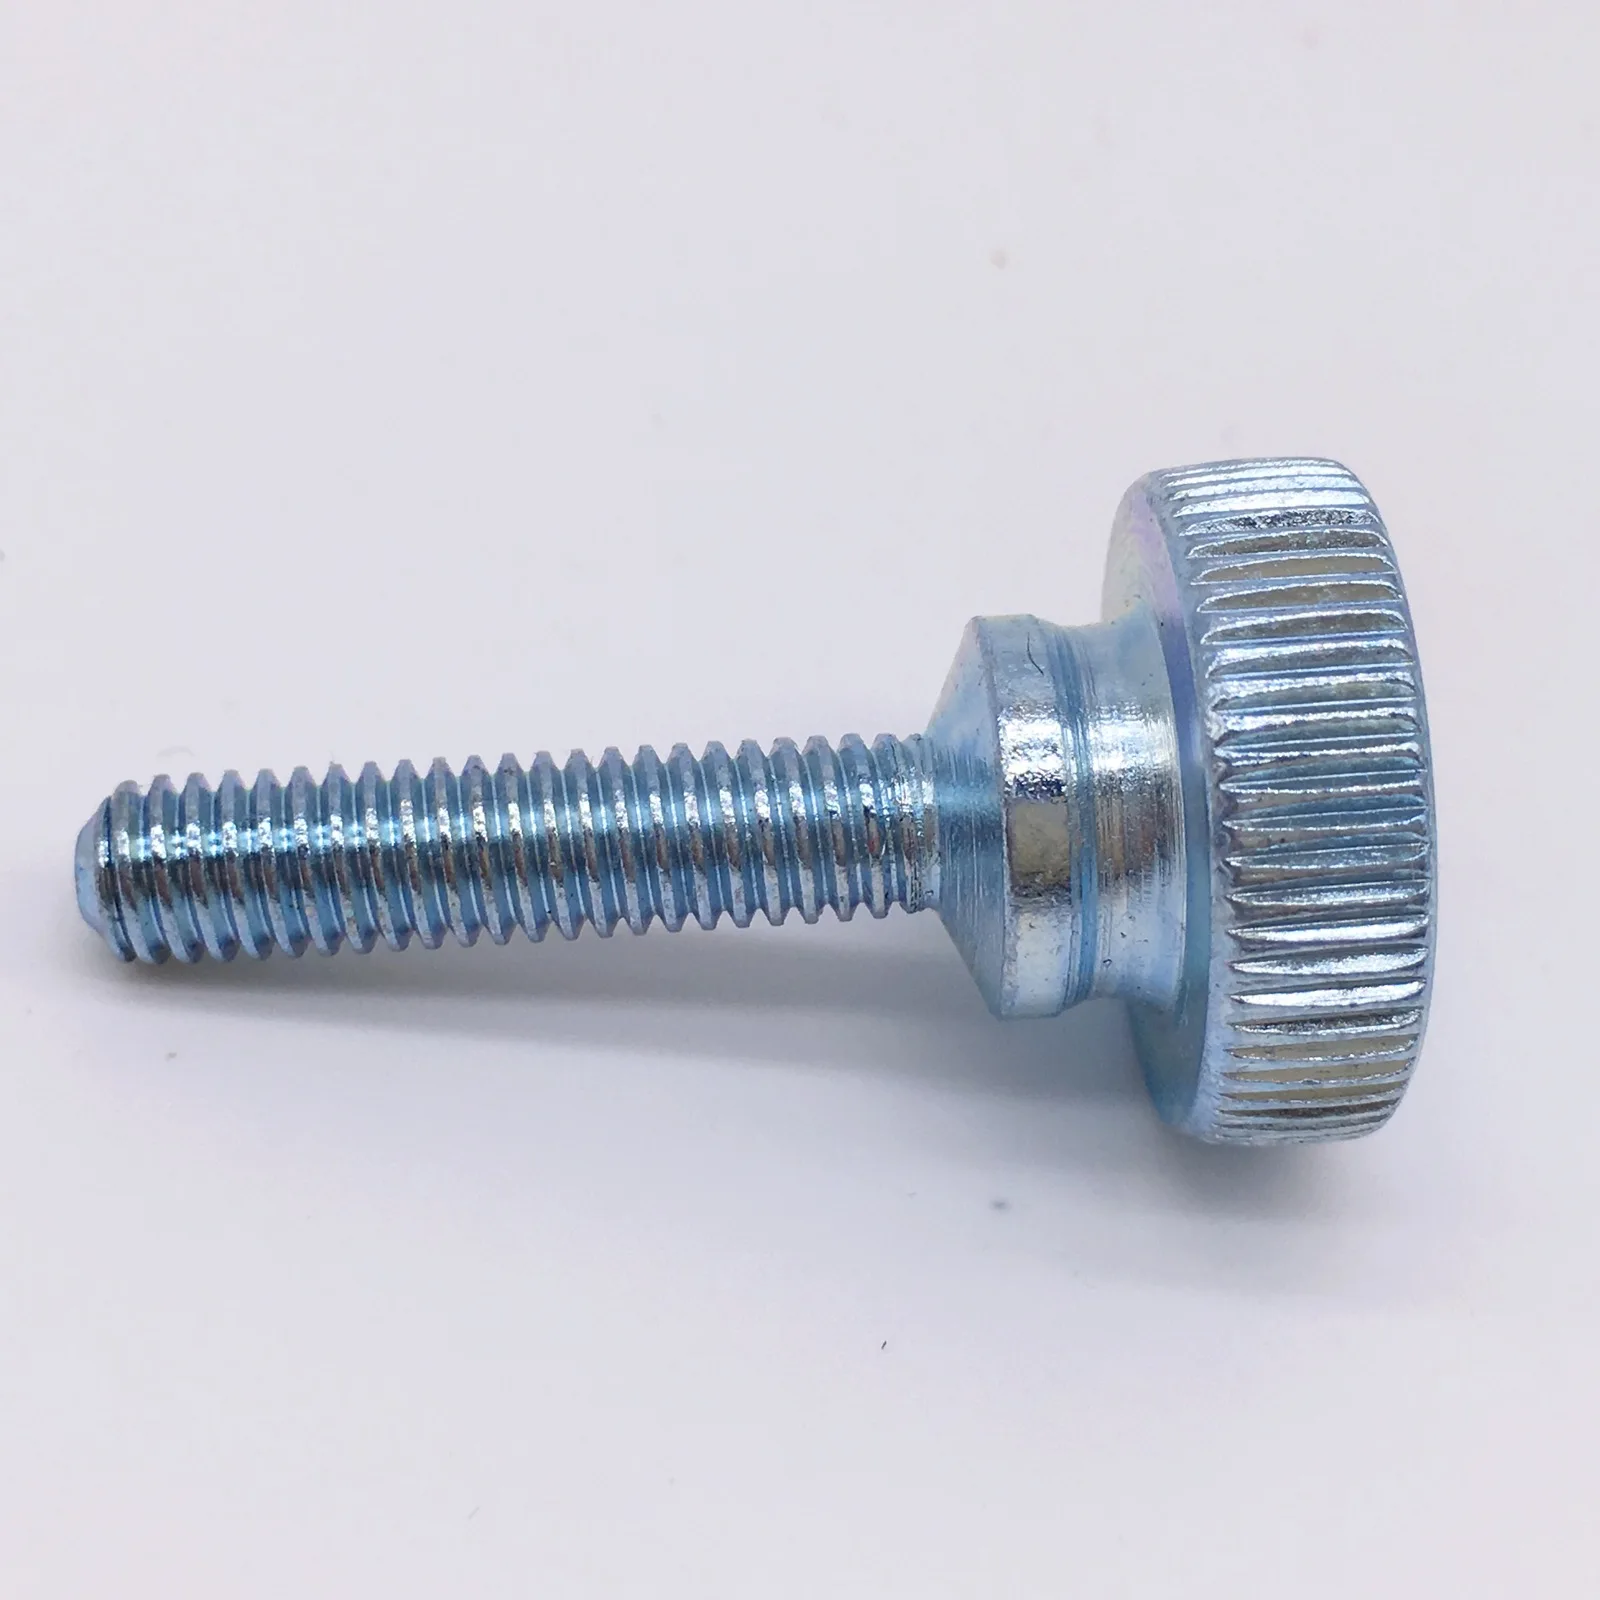 

M8x12 Thumb Screws Knurled Head With Should Bolts Metric Zinc Plated Pack 10